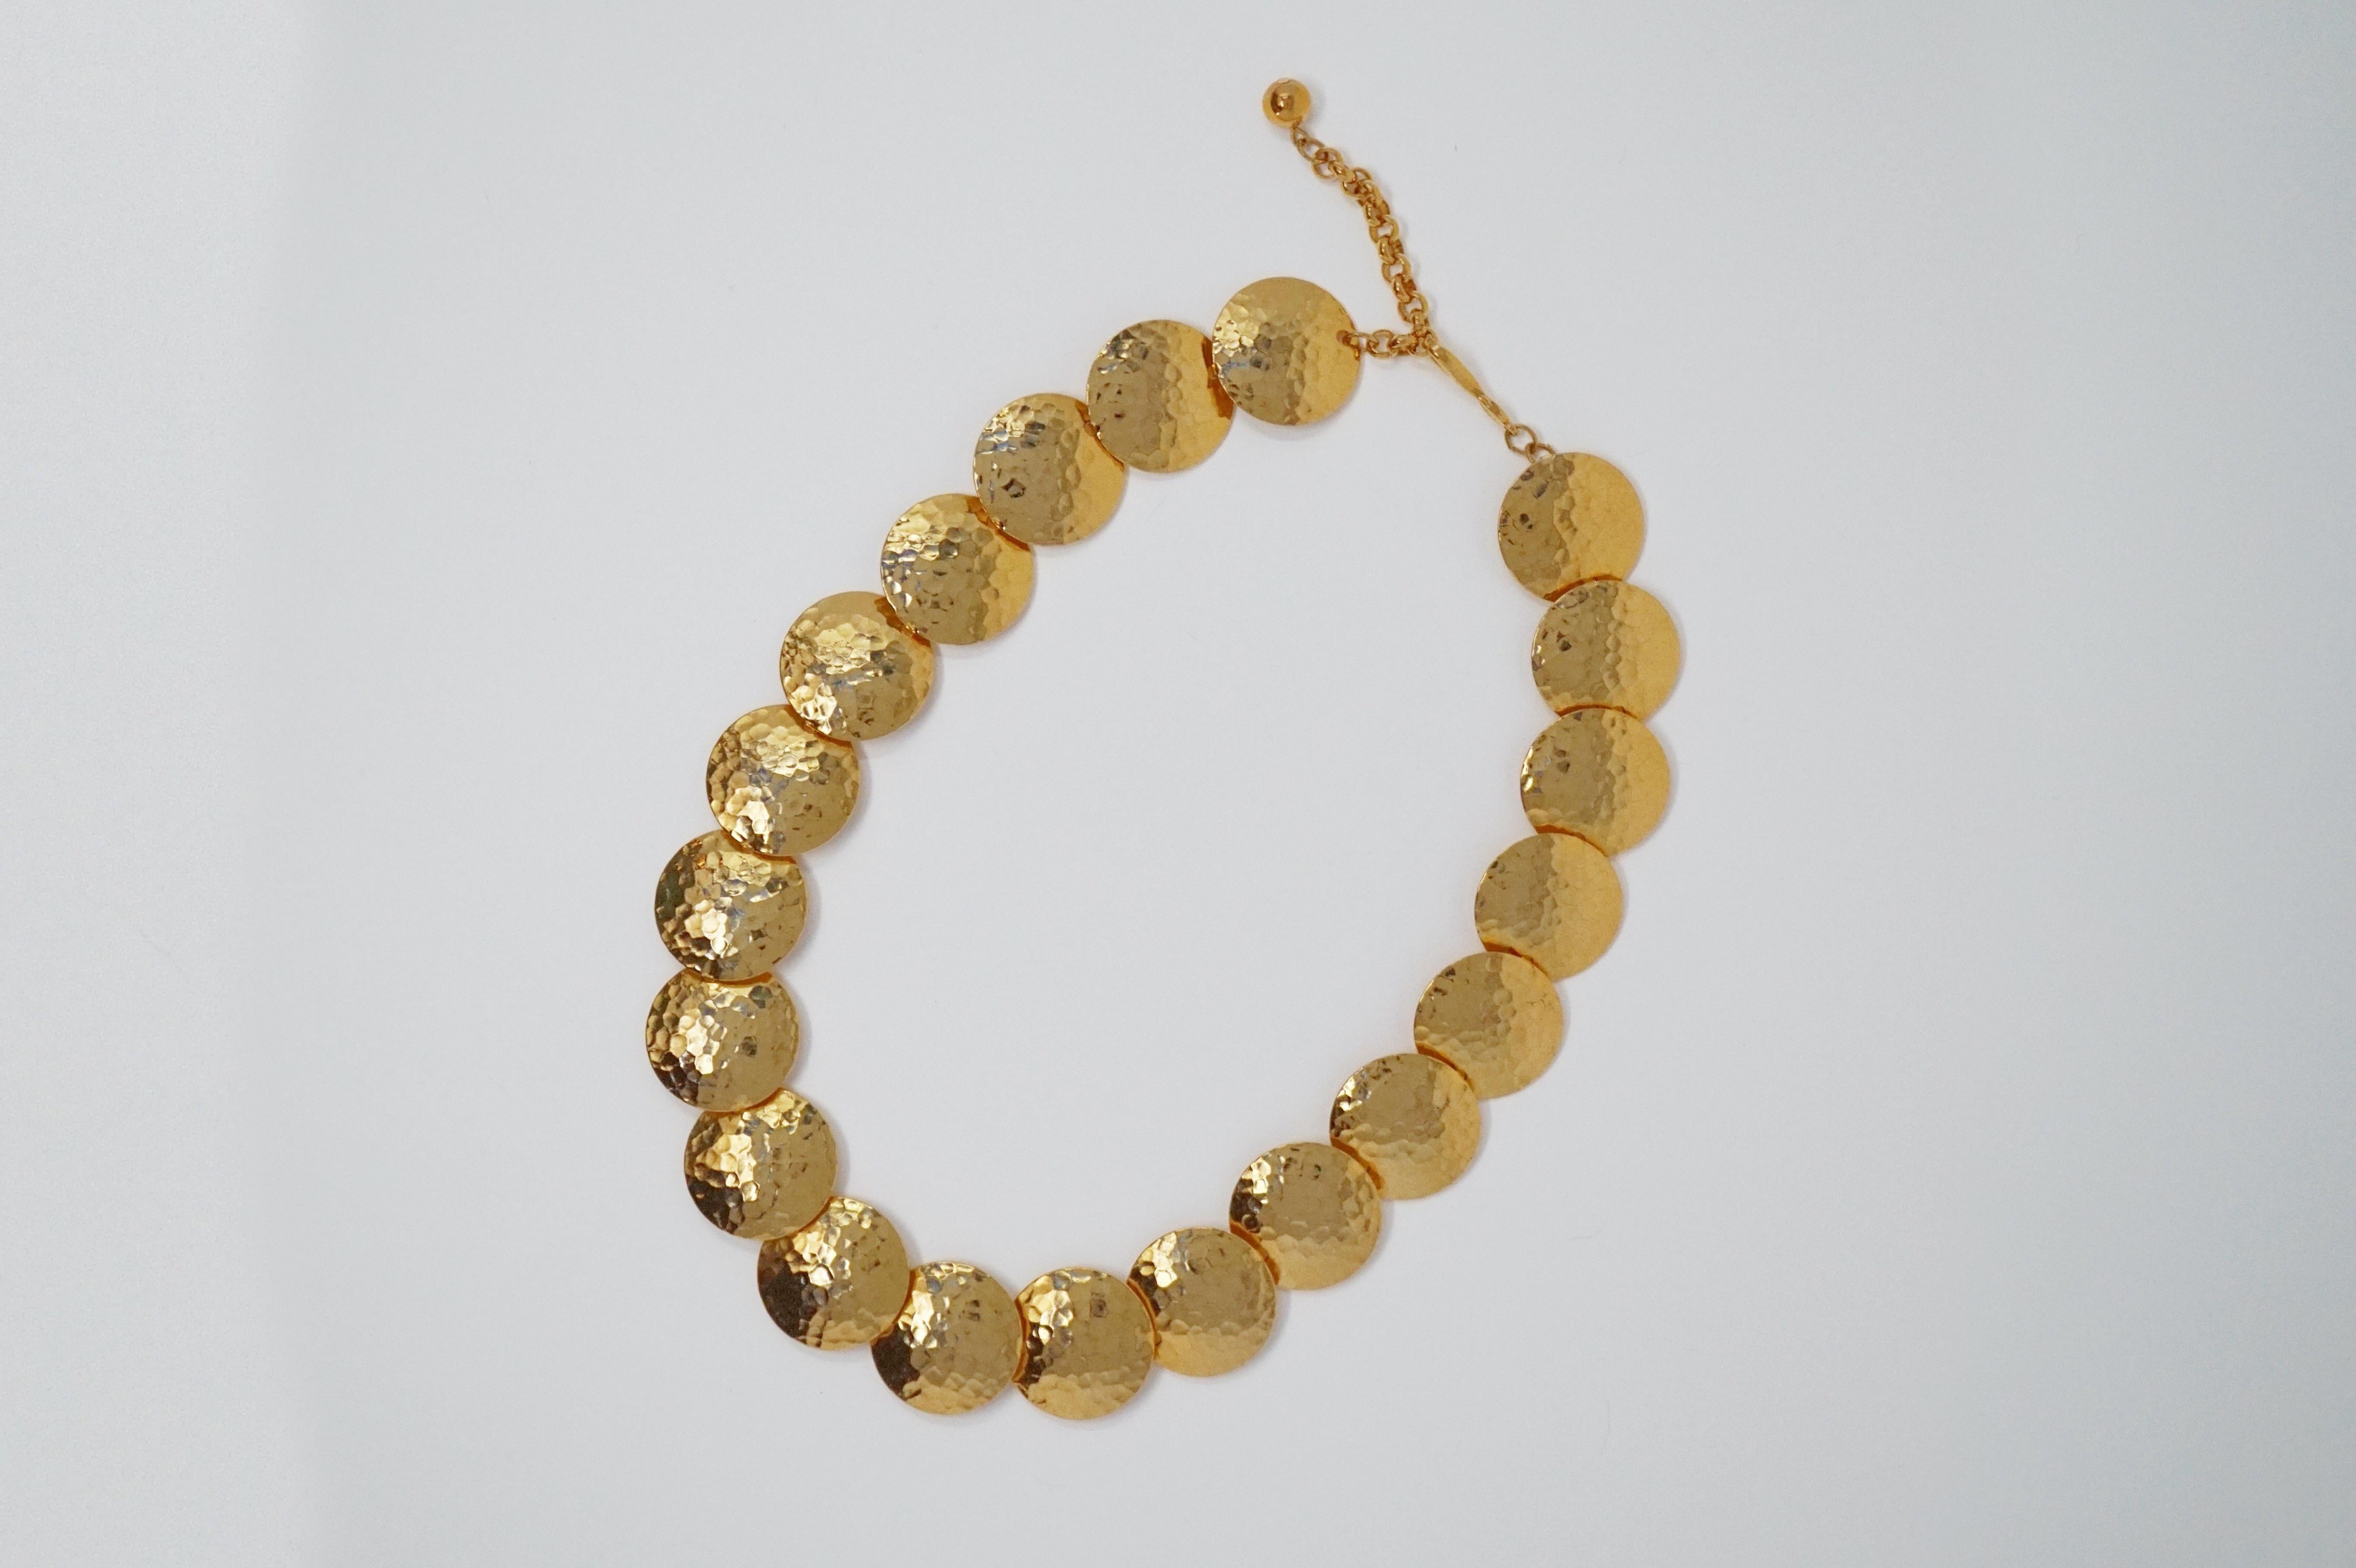 This chic gilded hammered disc statement necklace by Napier, circa 1980, makes a bold statement!  A wonderful resort wear accessory, this piece would pair perfectly with a kaftan or printed maxi dress.

ABOUT NAPIER:
Founded in 1875, Napier is an